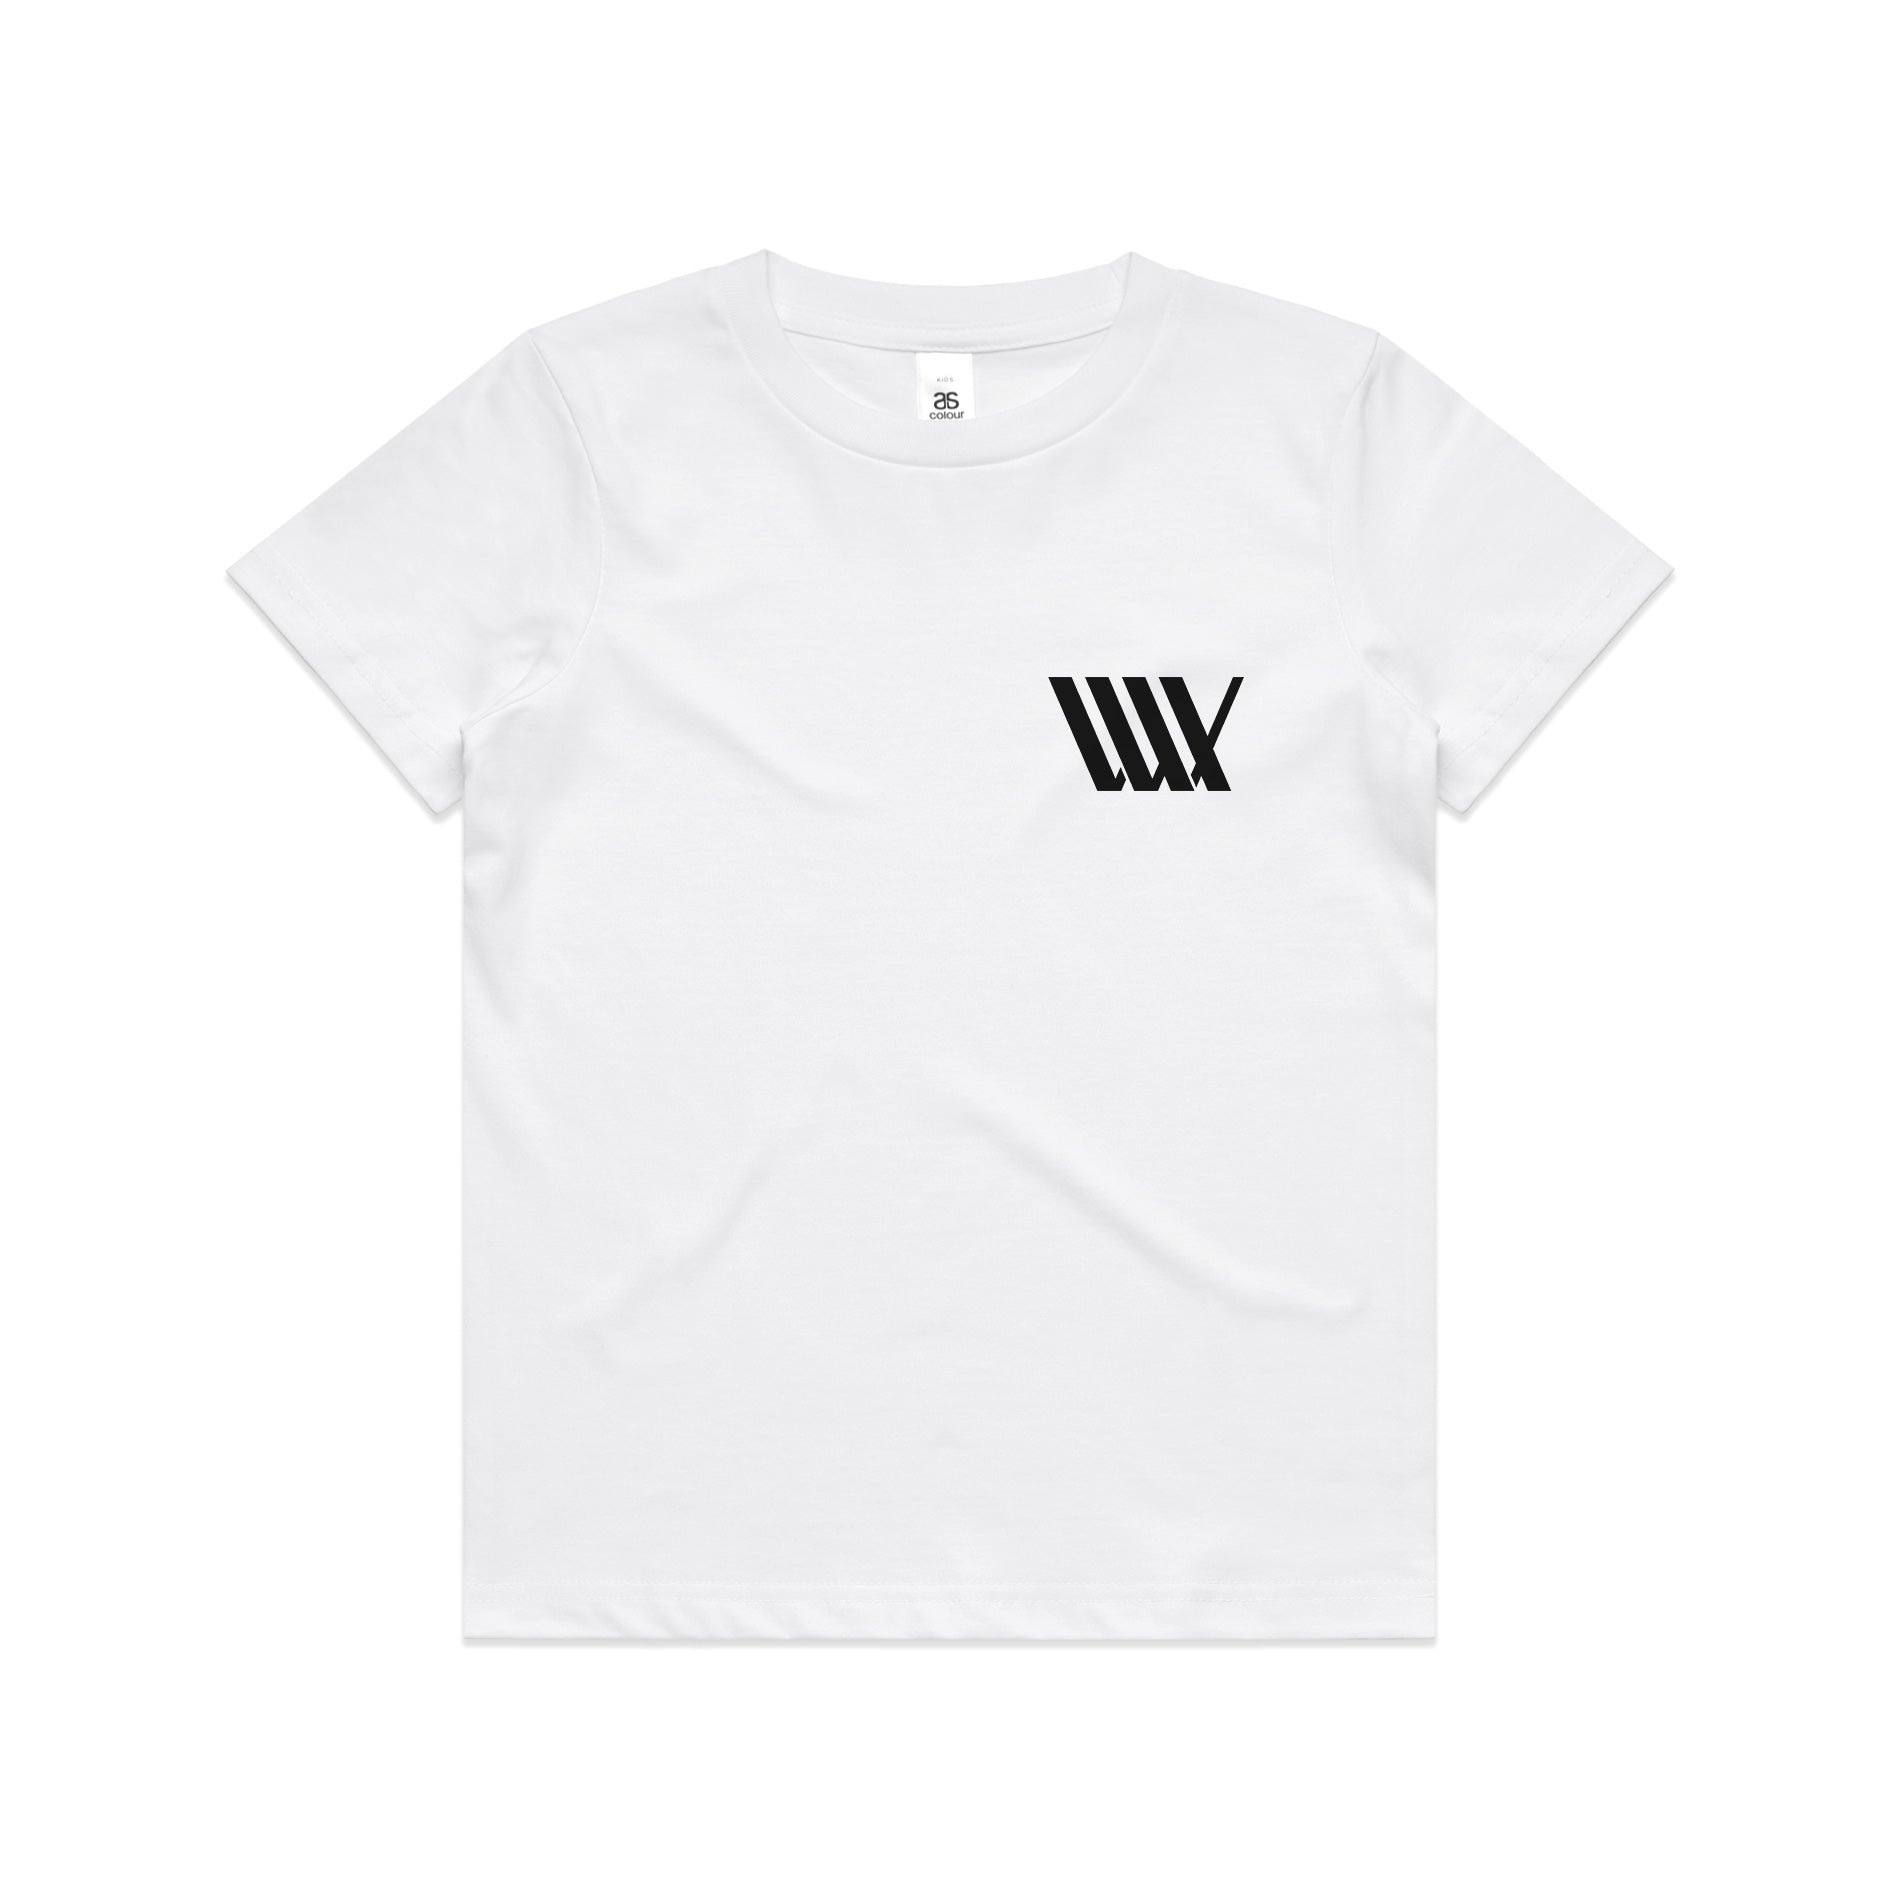 A white LUXBMX Izaac X Rico Kids Tee with a black logo of the LUX team printed on it.